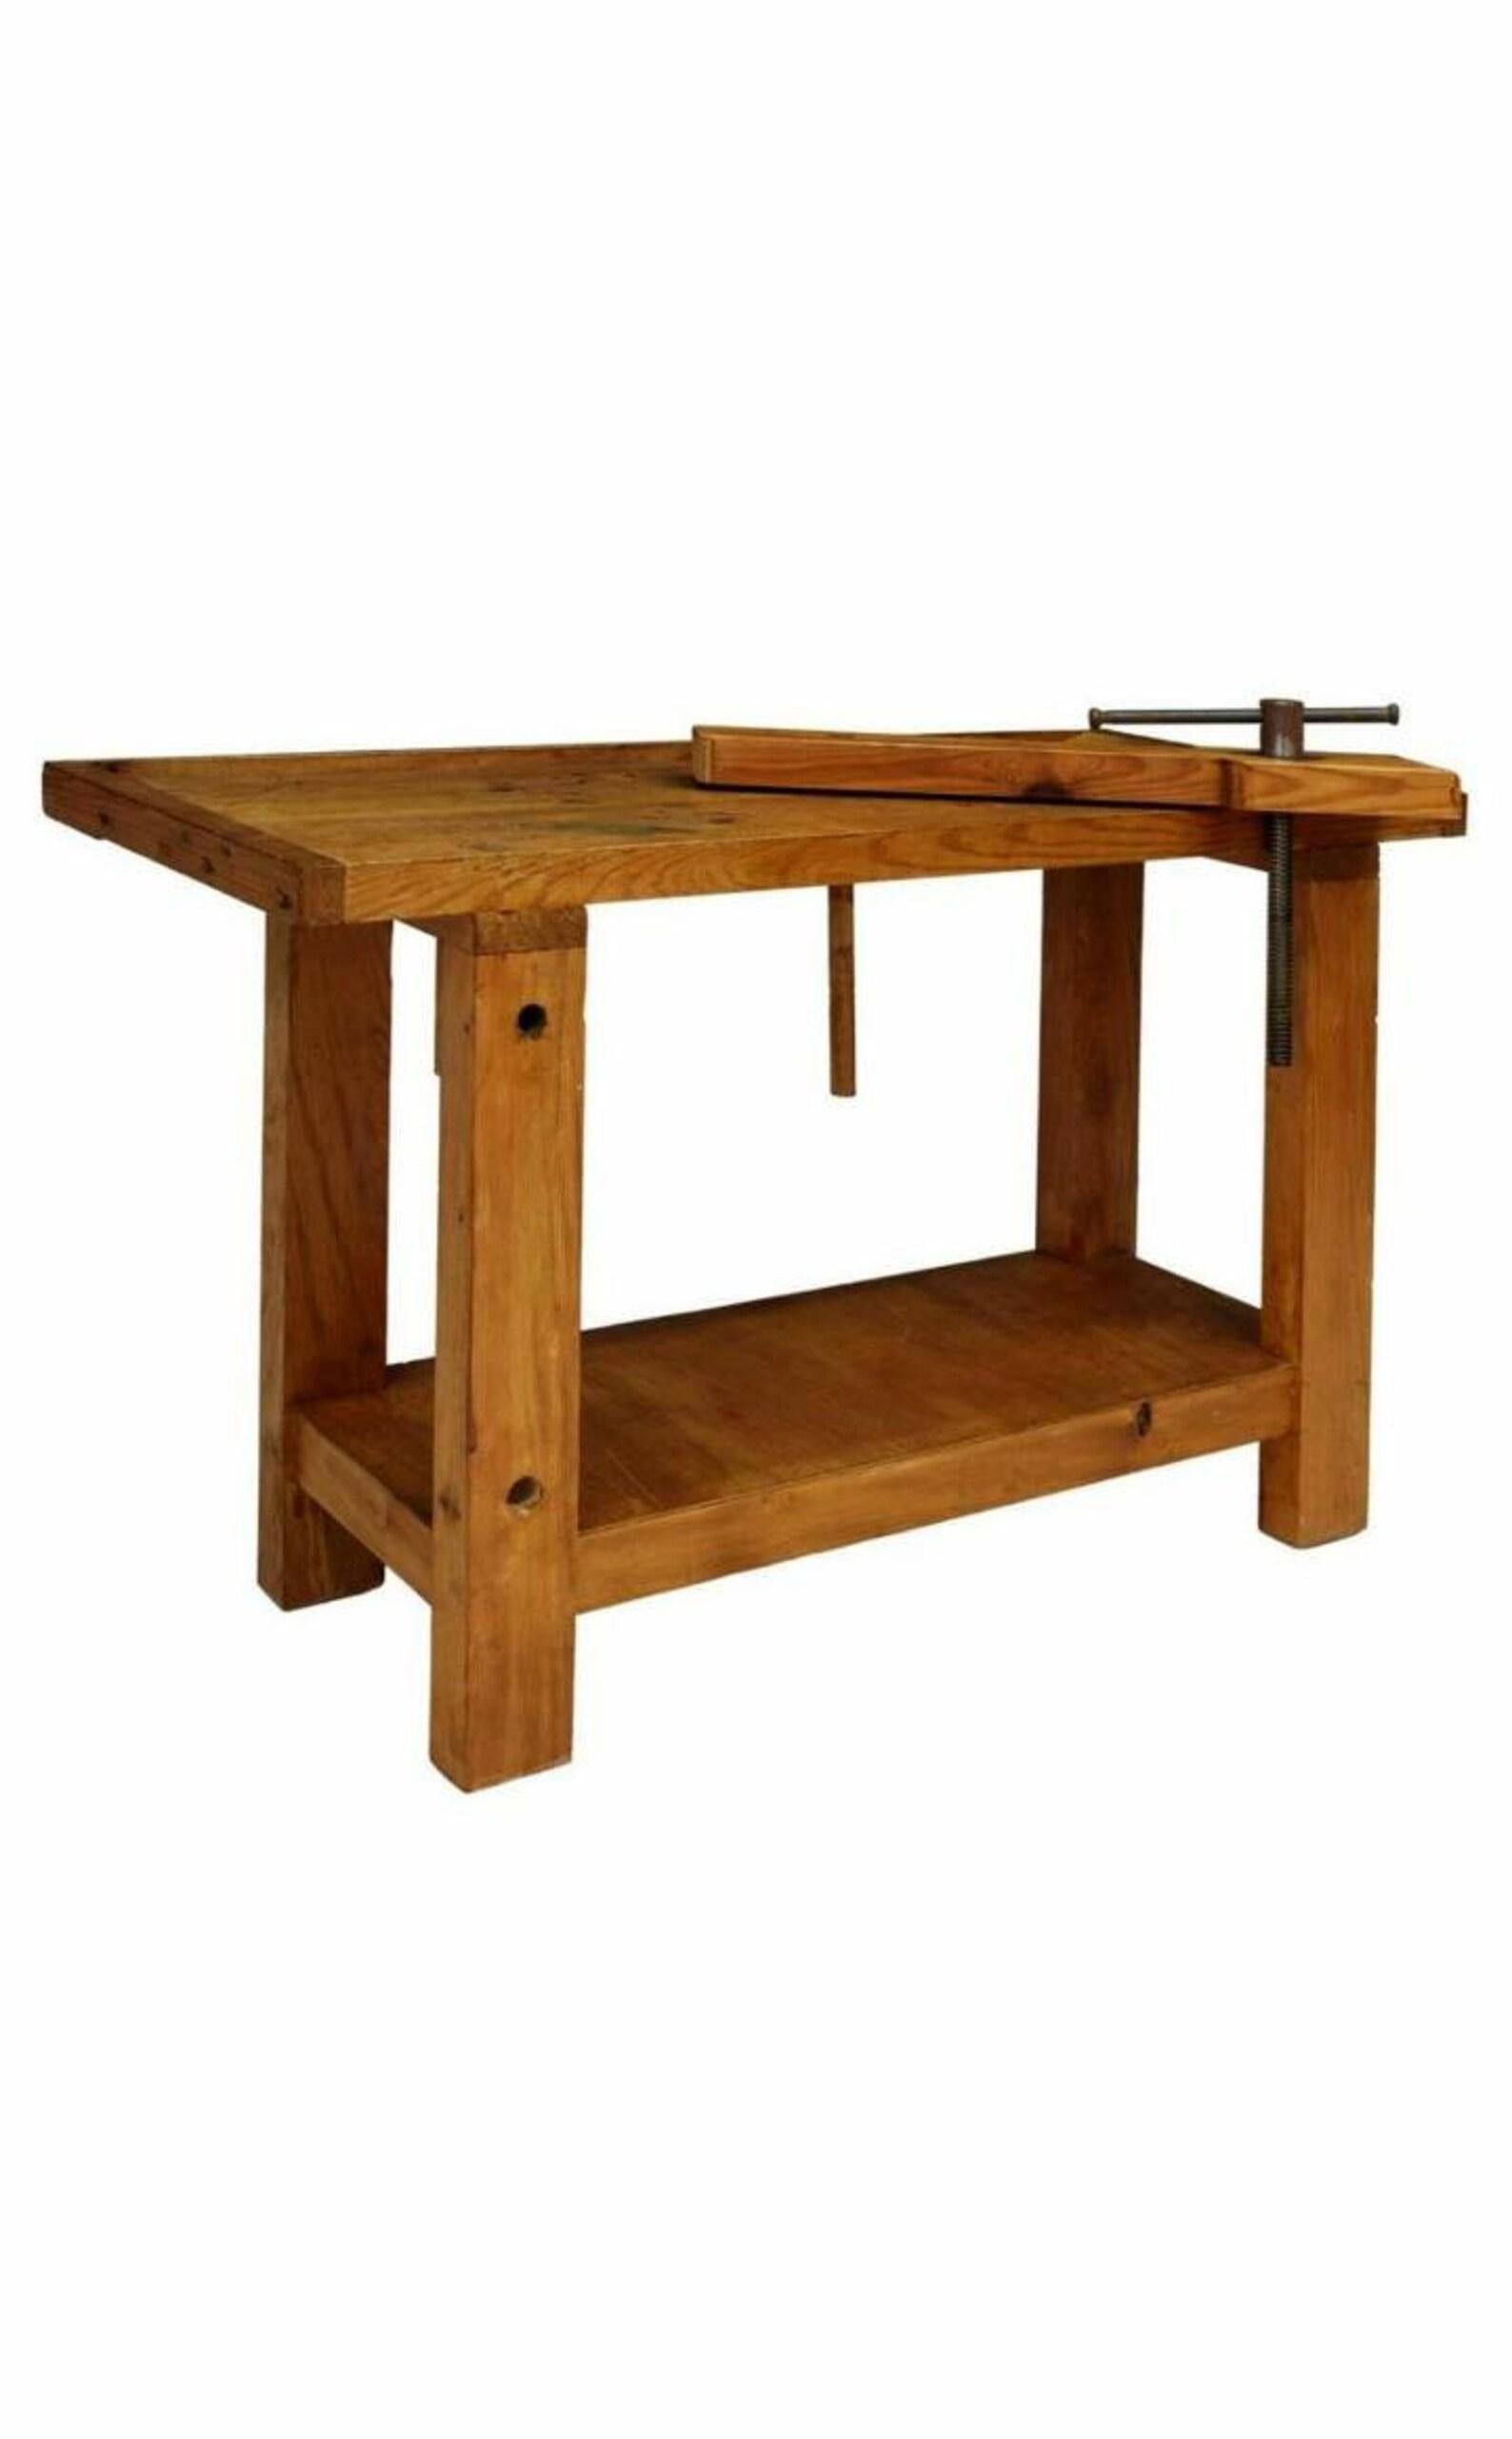 sturdy table used for carpentry